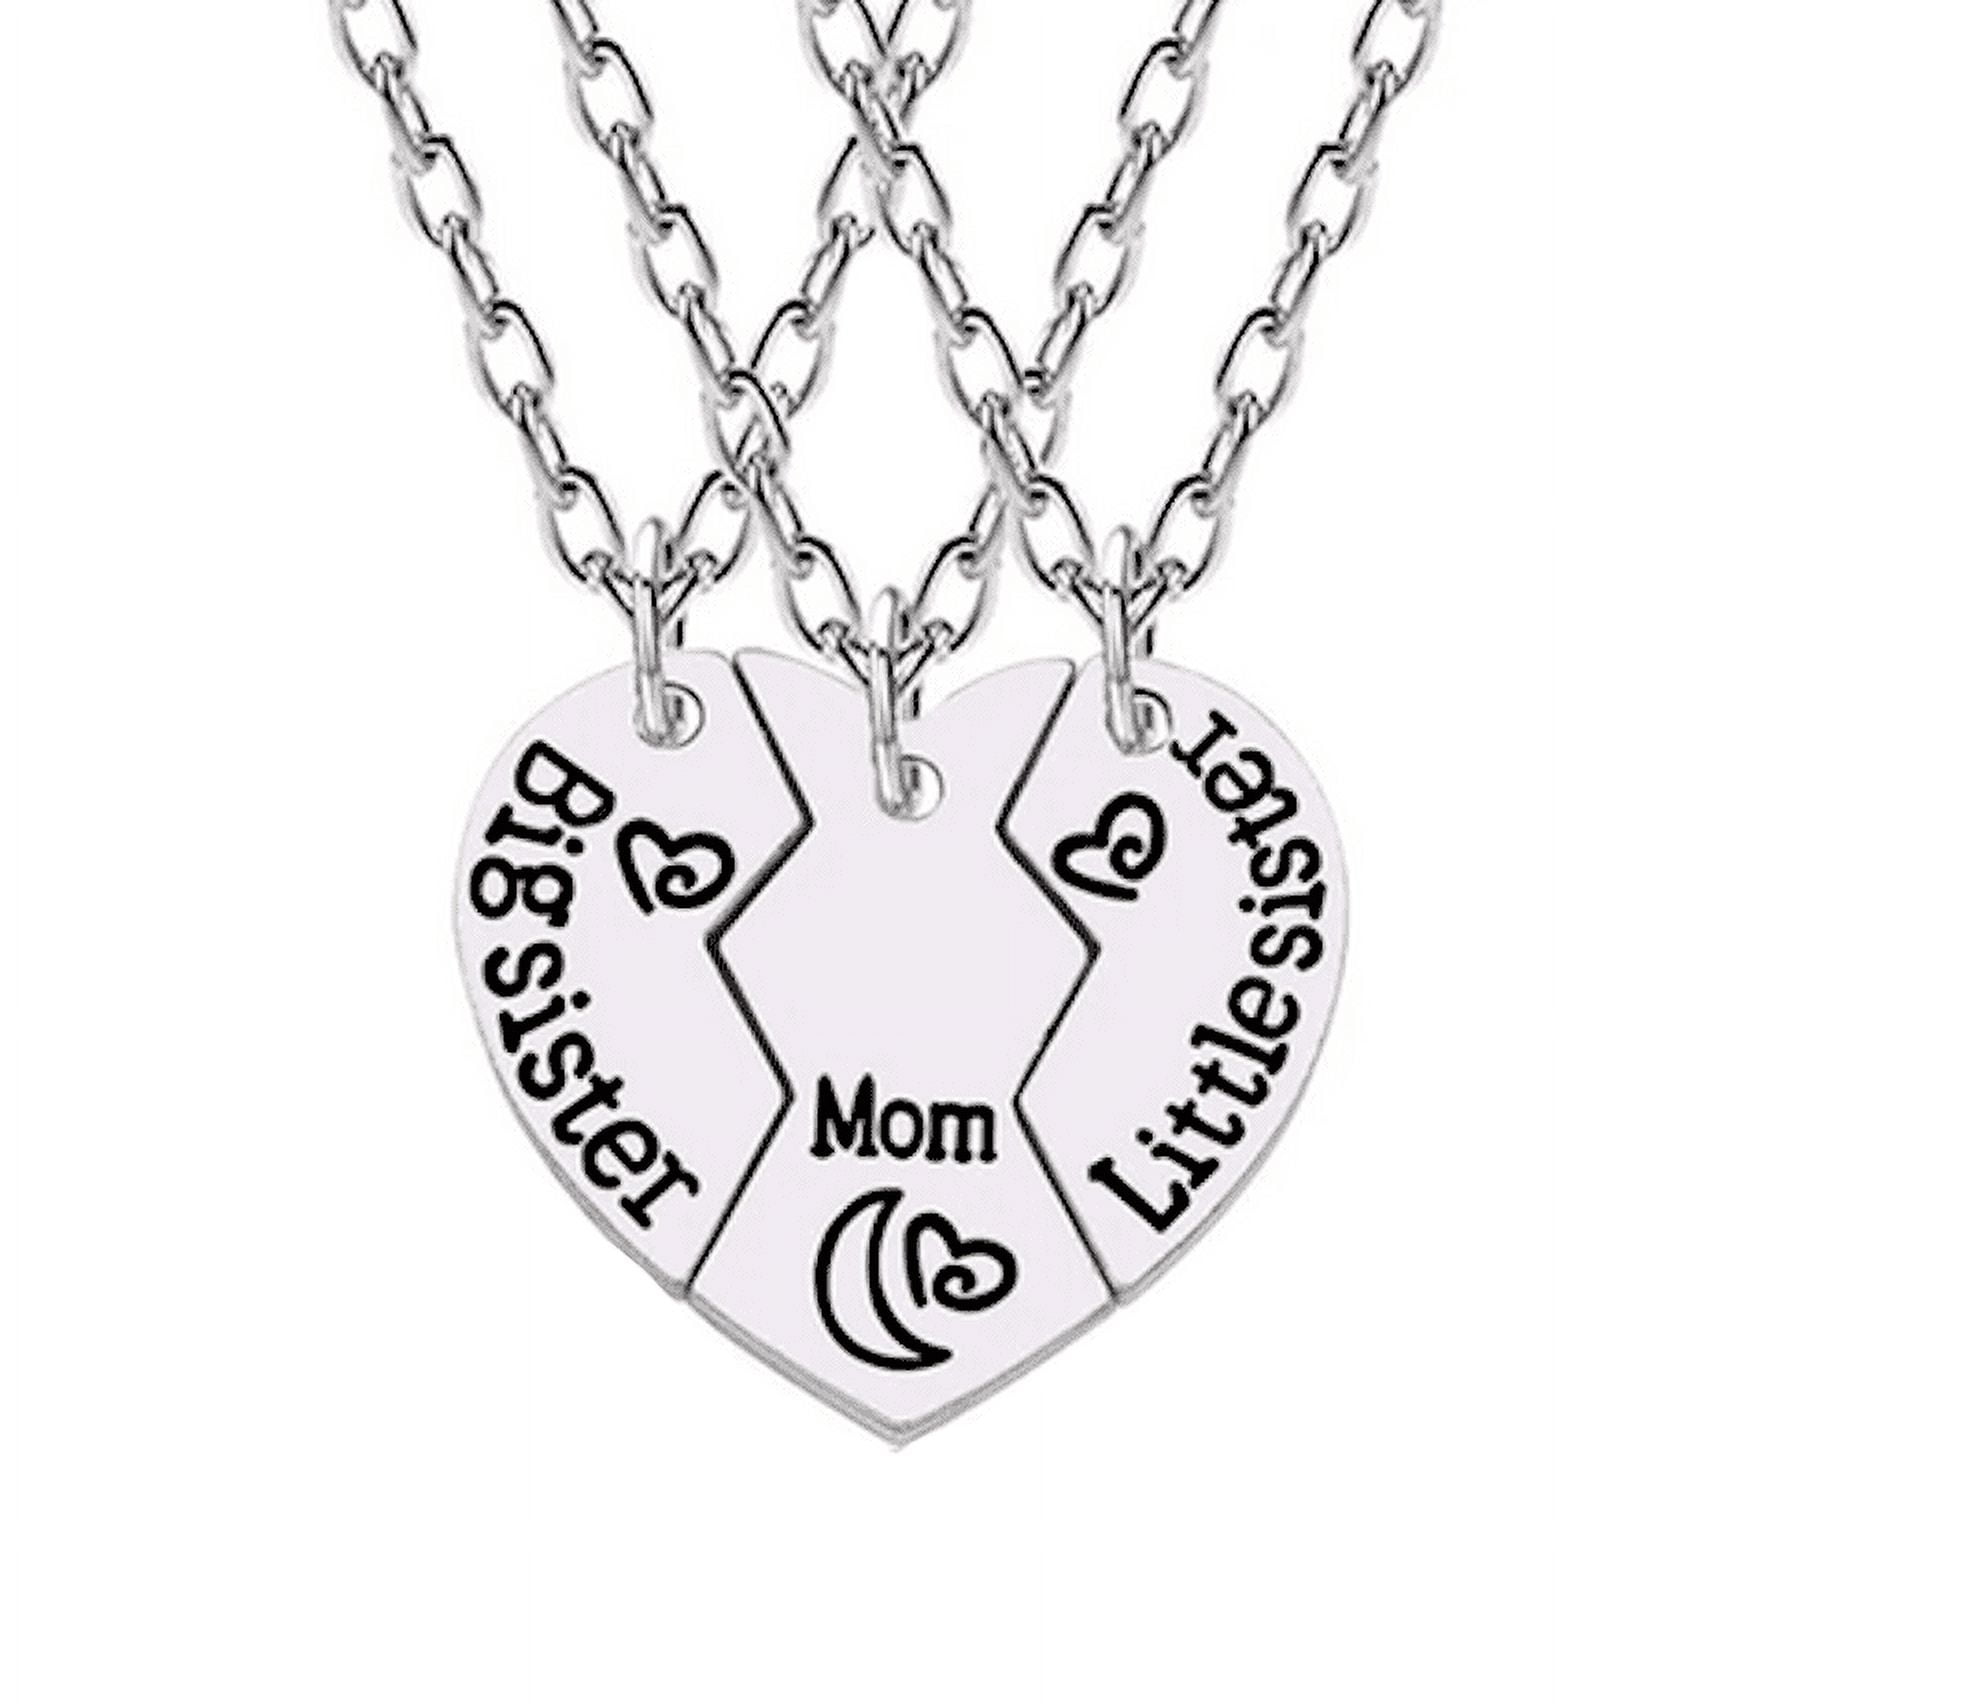 YEEQIN 3PCs/Set Mom Big Sister Little Sister Mom Necklaces Set Mother  Daughters Matching Heart Jewley Set